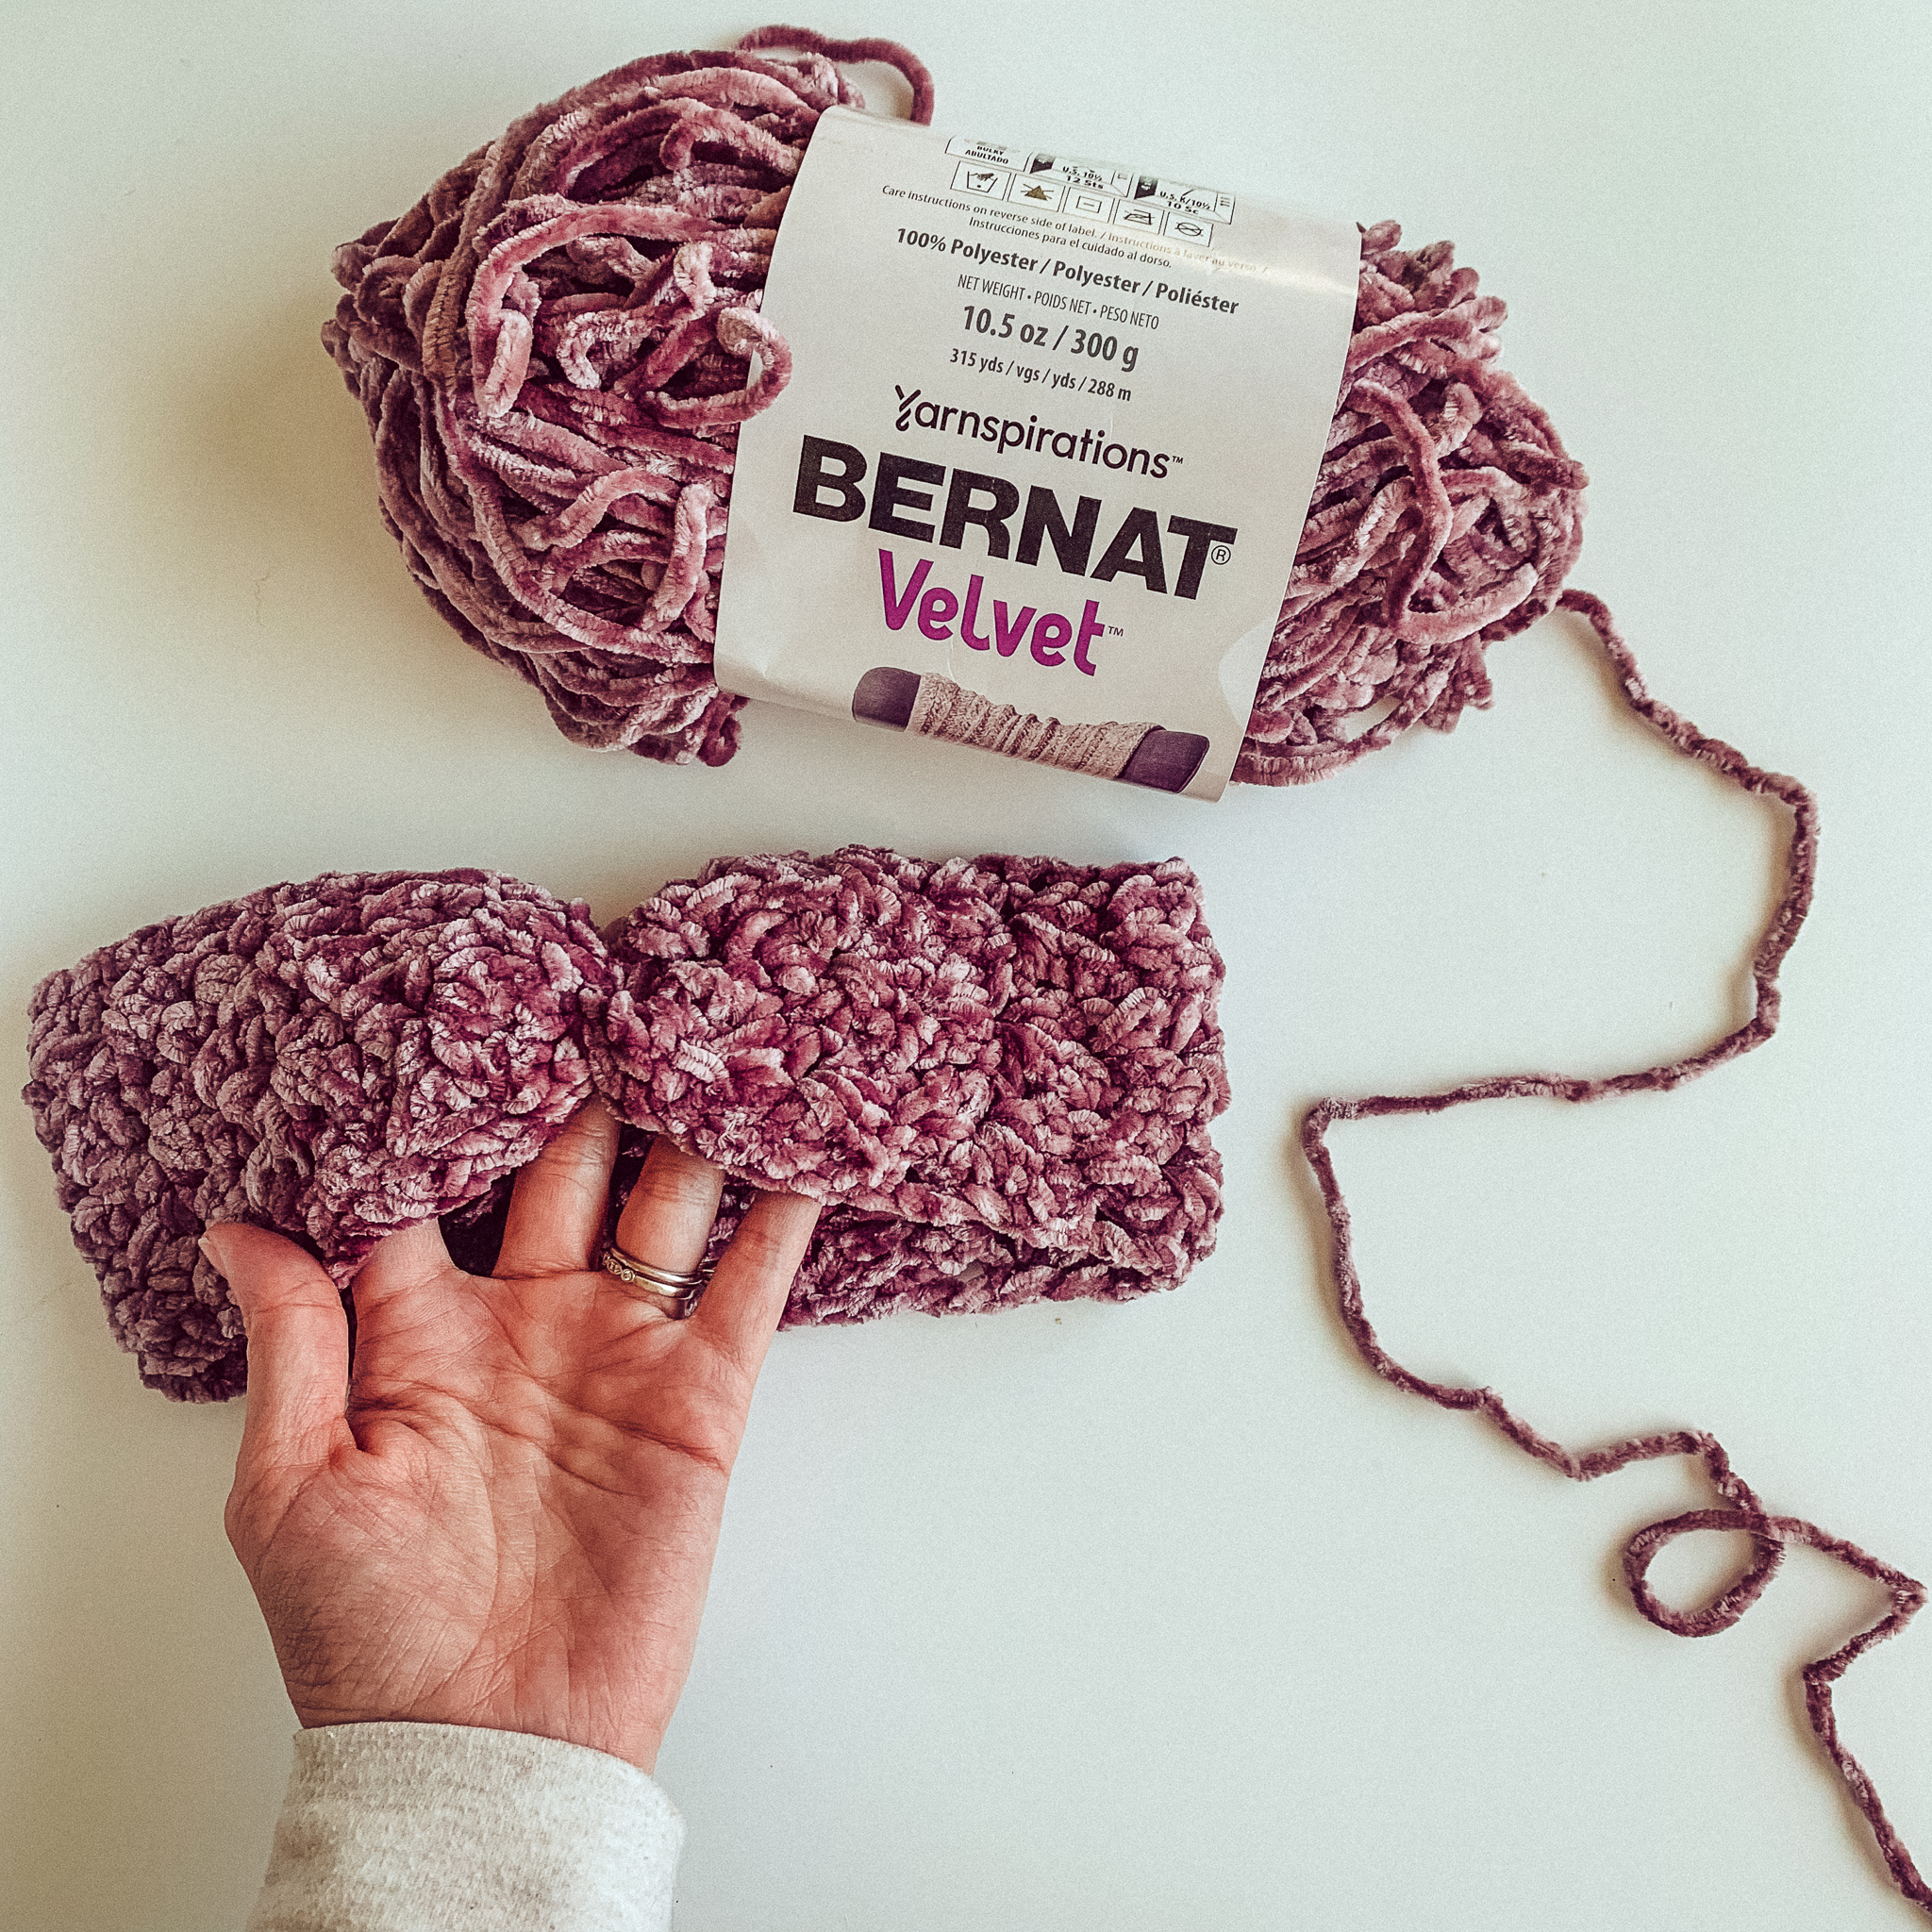 The photo shows a skein of purple velvet yarn, and a hand holding a crochet ear warmer made from same yarn. The background is white.